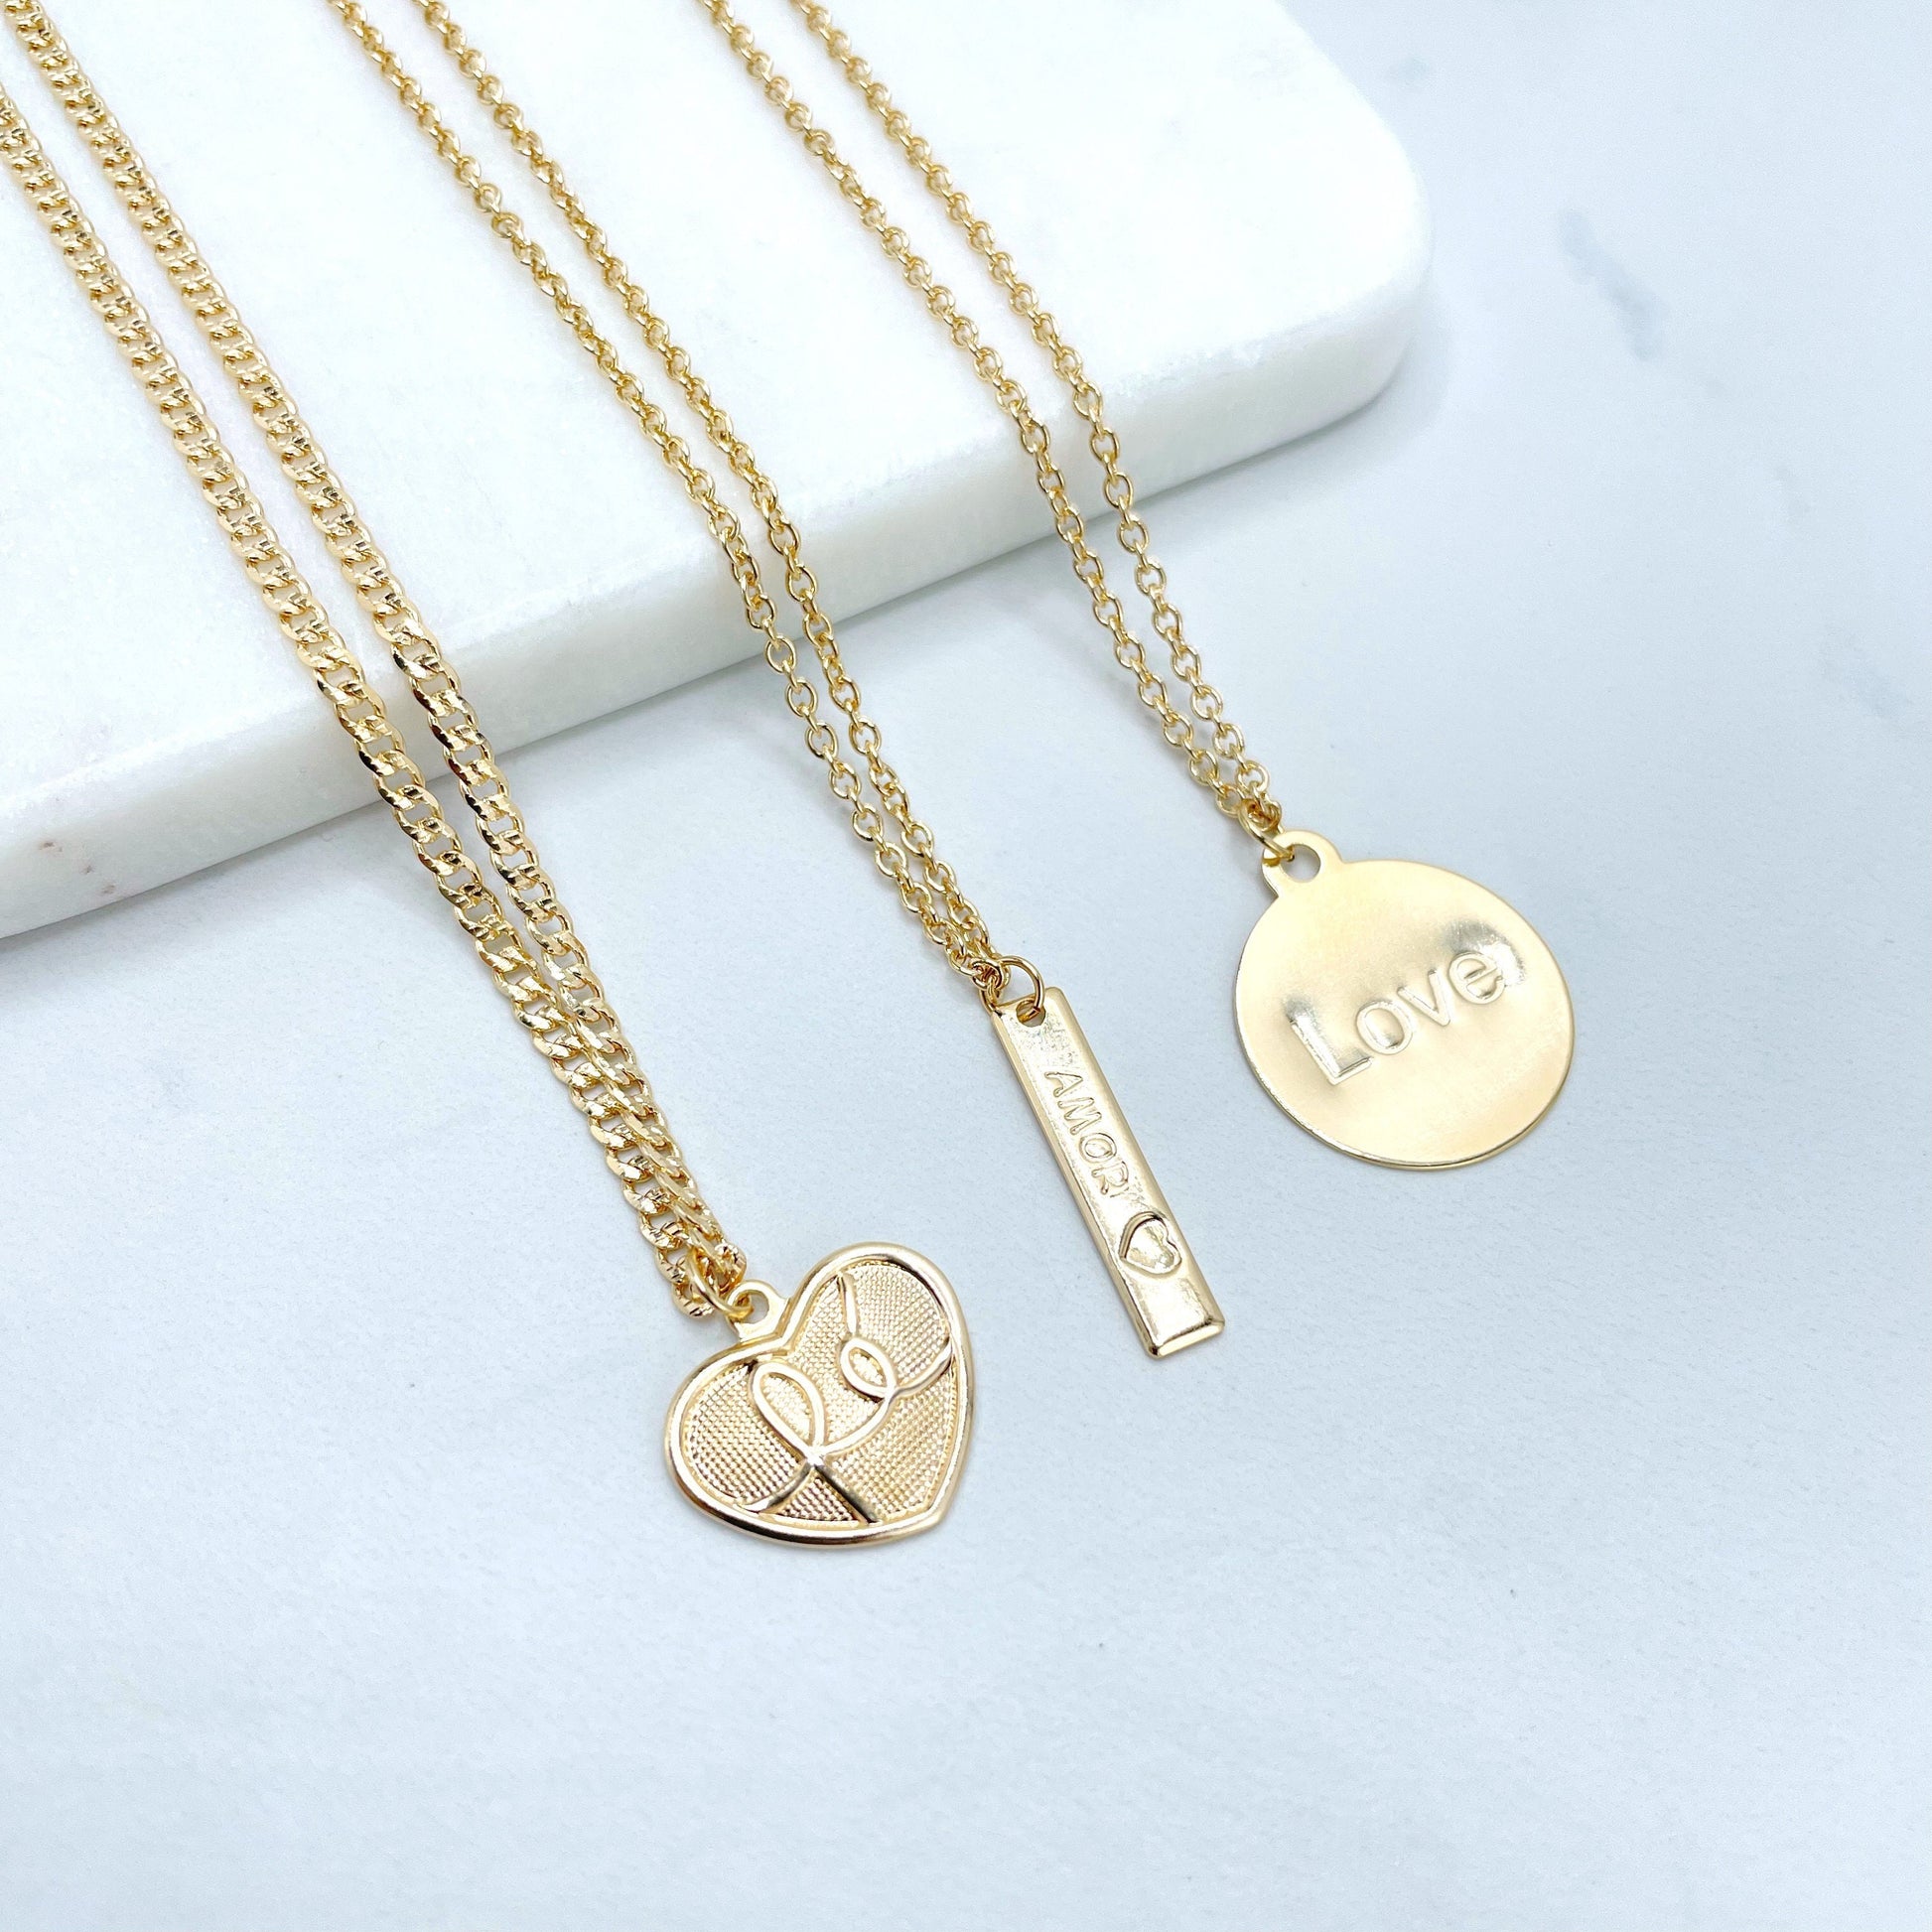 18k Gold Filled 03 Layered Necklace Set, with FÉ (Faith) Heart Shape, AMOR (Love) Board and LOVE Medal Charms, Wholesale Jewelry Supplies